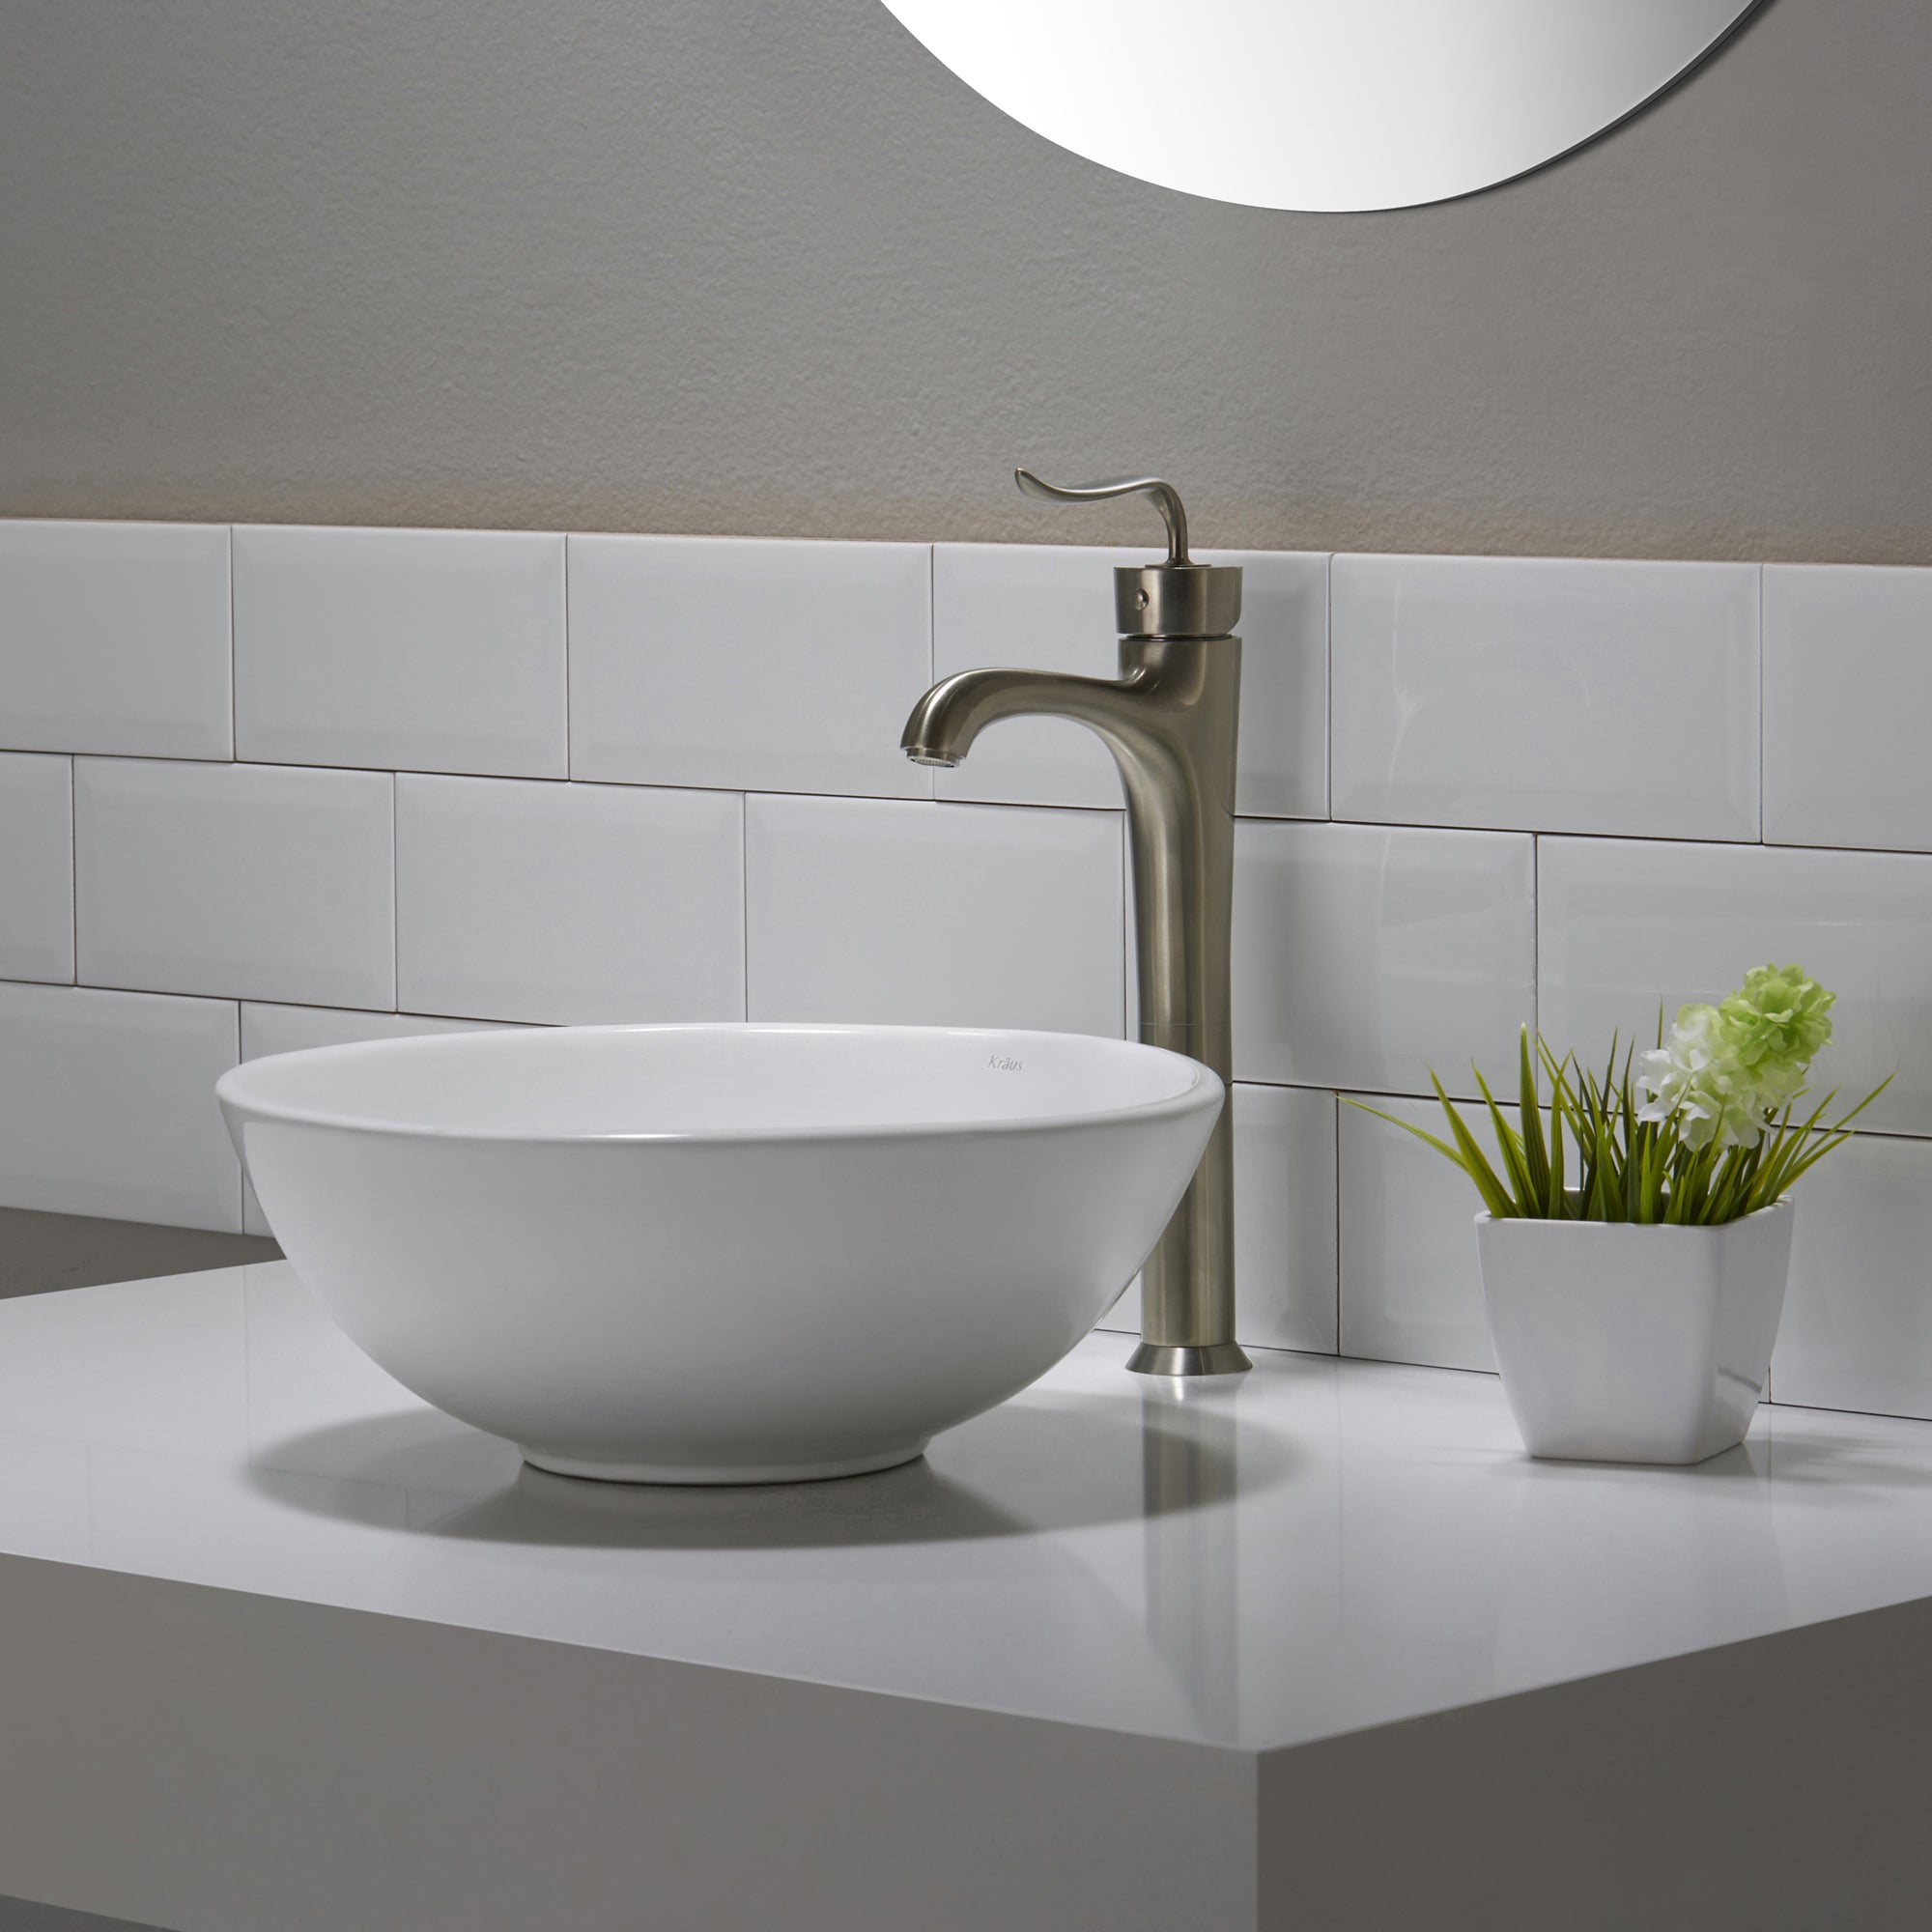 Stylish Console Sinks in White